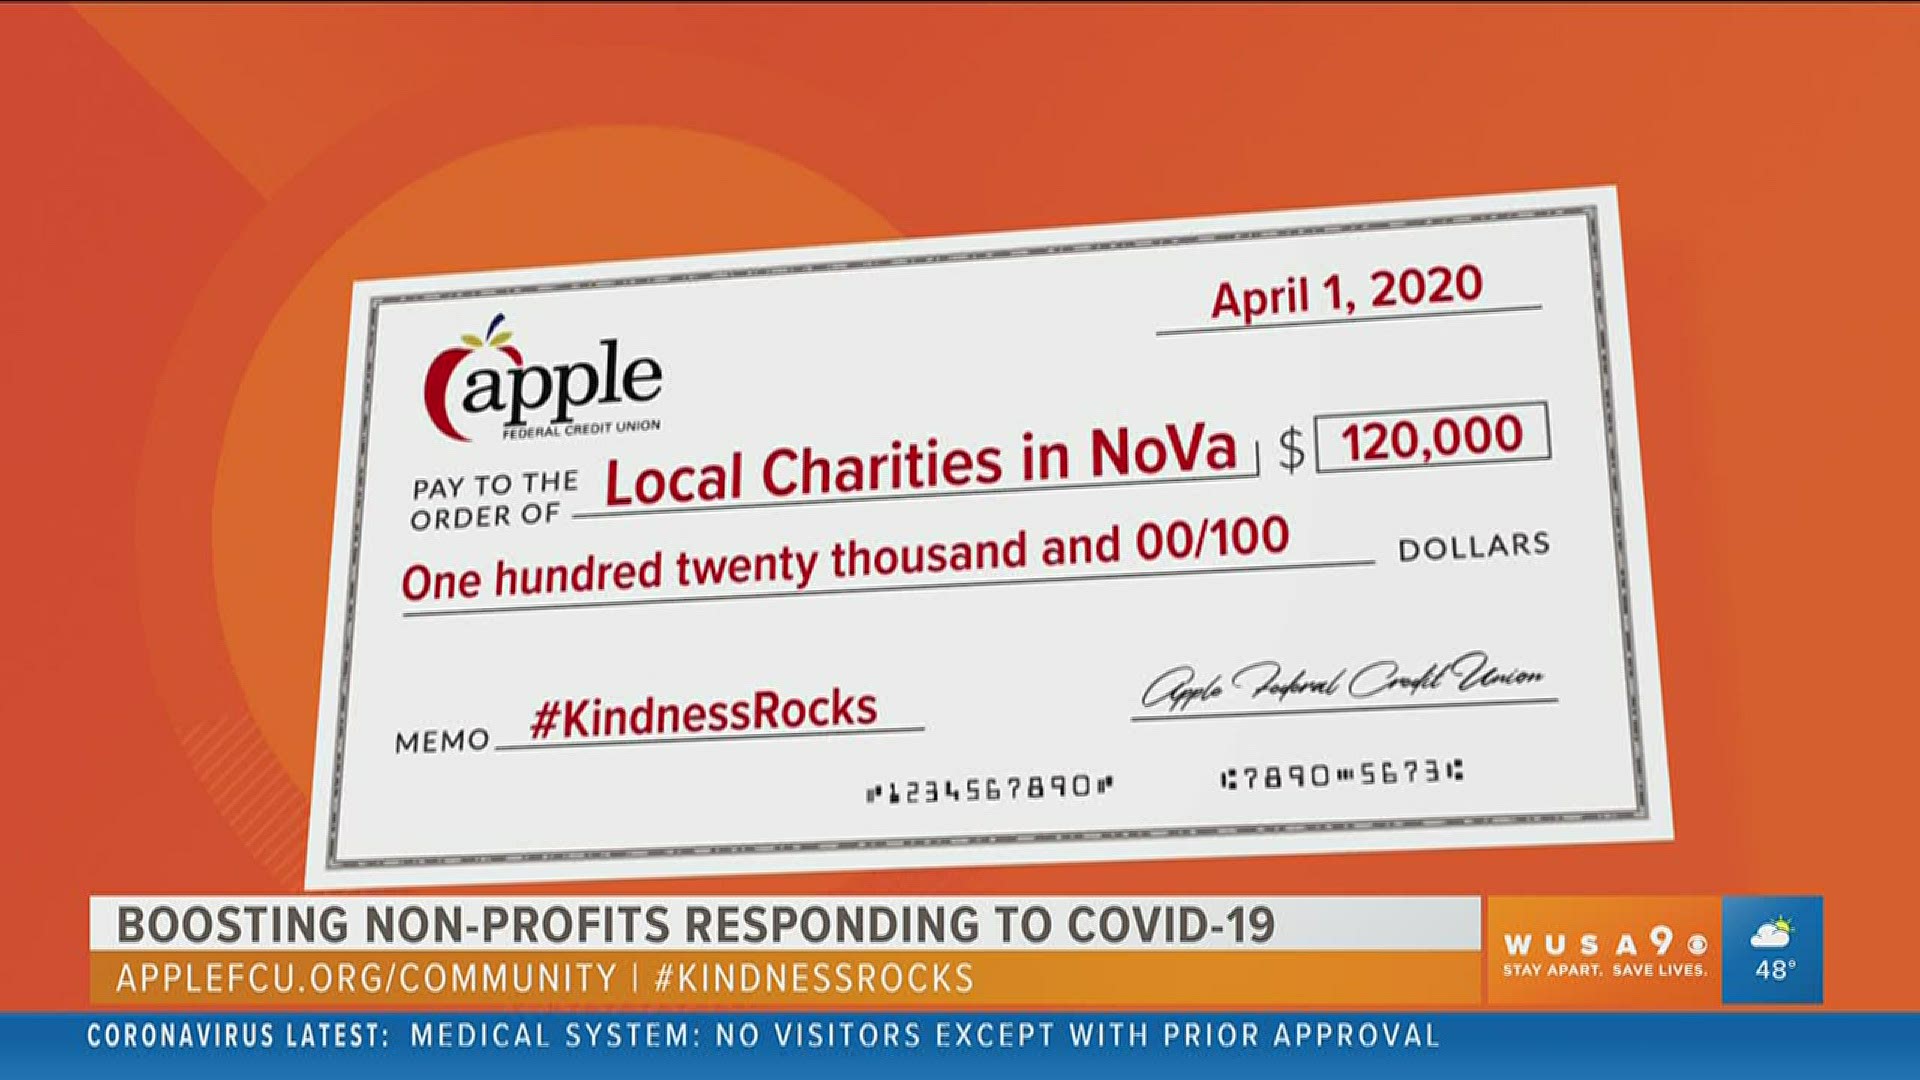 In this segment sponsored by Apple Federal Credit Union, see how local non-profits are being lifted up during the pandemic by Apple's donation of $120,000.